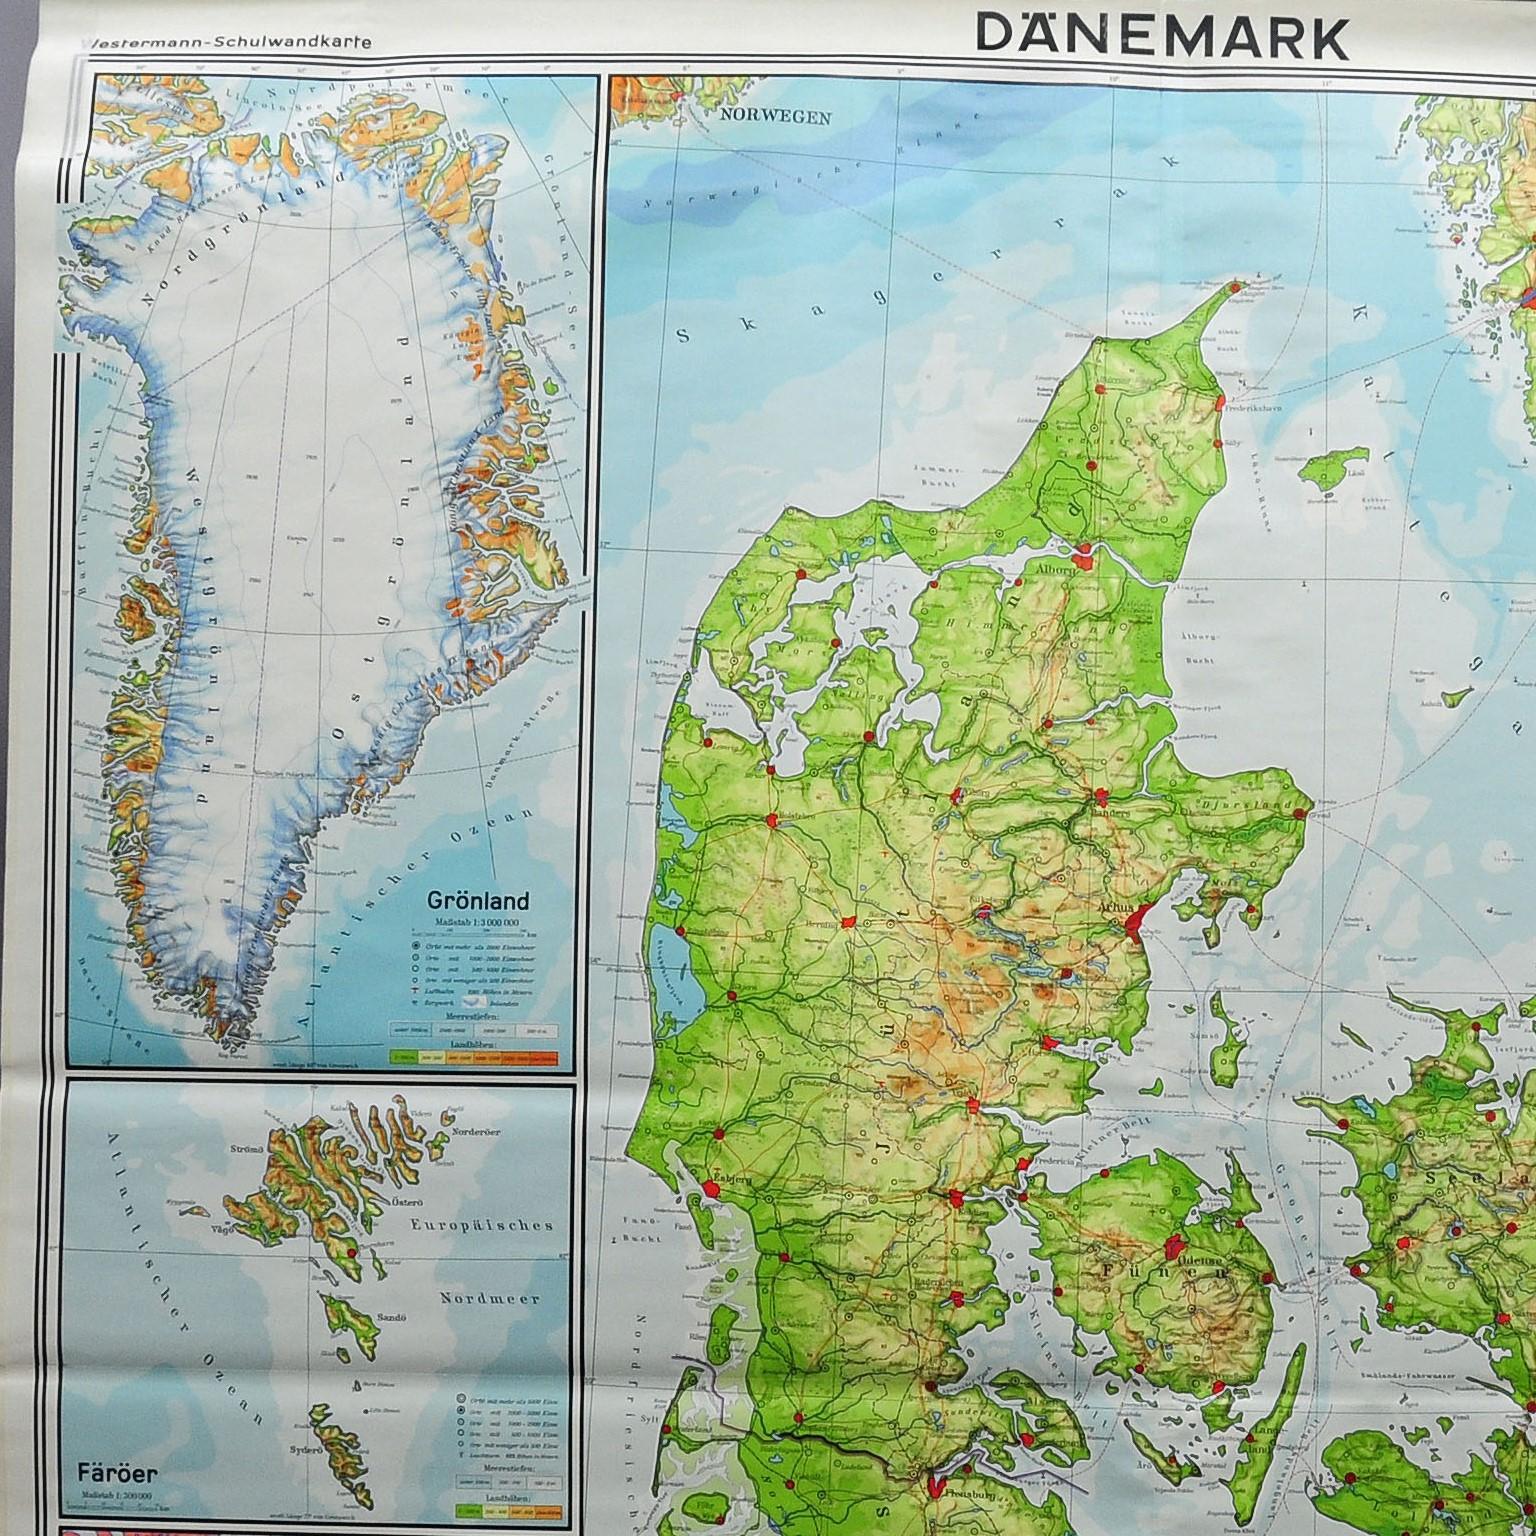 The vintage pull-down mural map illustrates Denmark with Greenland, the Faroe Islands and the North Atlantic. Published by Westermann. Colorful print on paper reinforced with canvas.

Measurements:
Width 207 cm (81.50 inch)
Height 192 cm (75.59